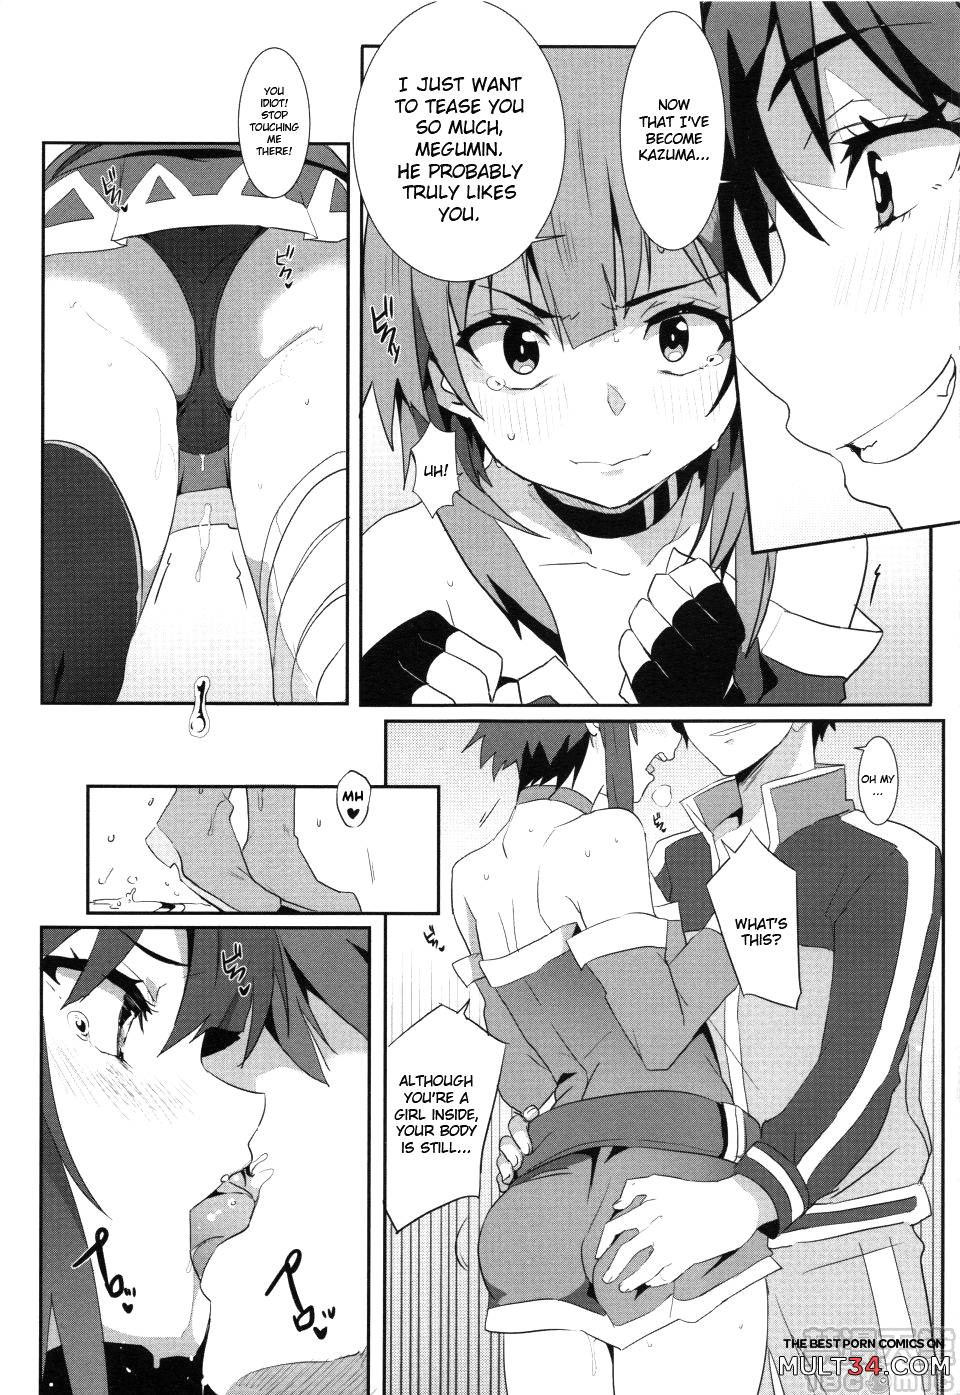 Blessing Megumin with a Magnificence Explosion! 5 page 6